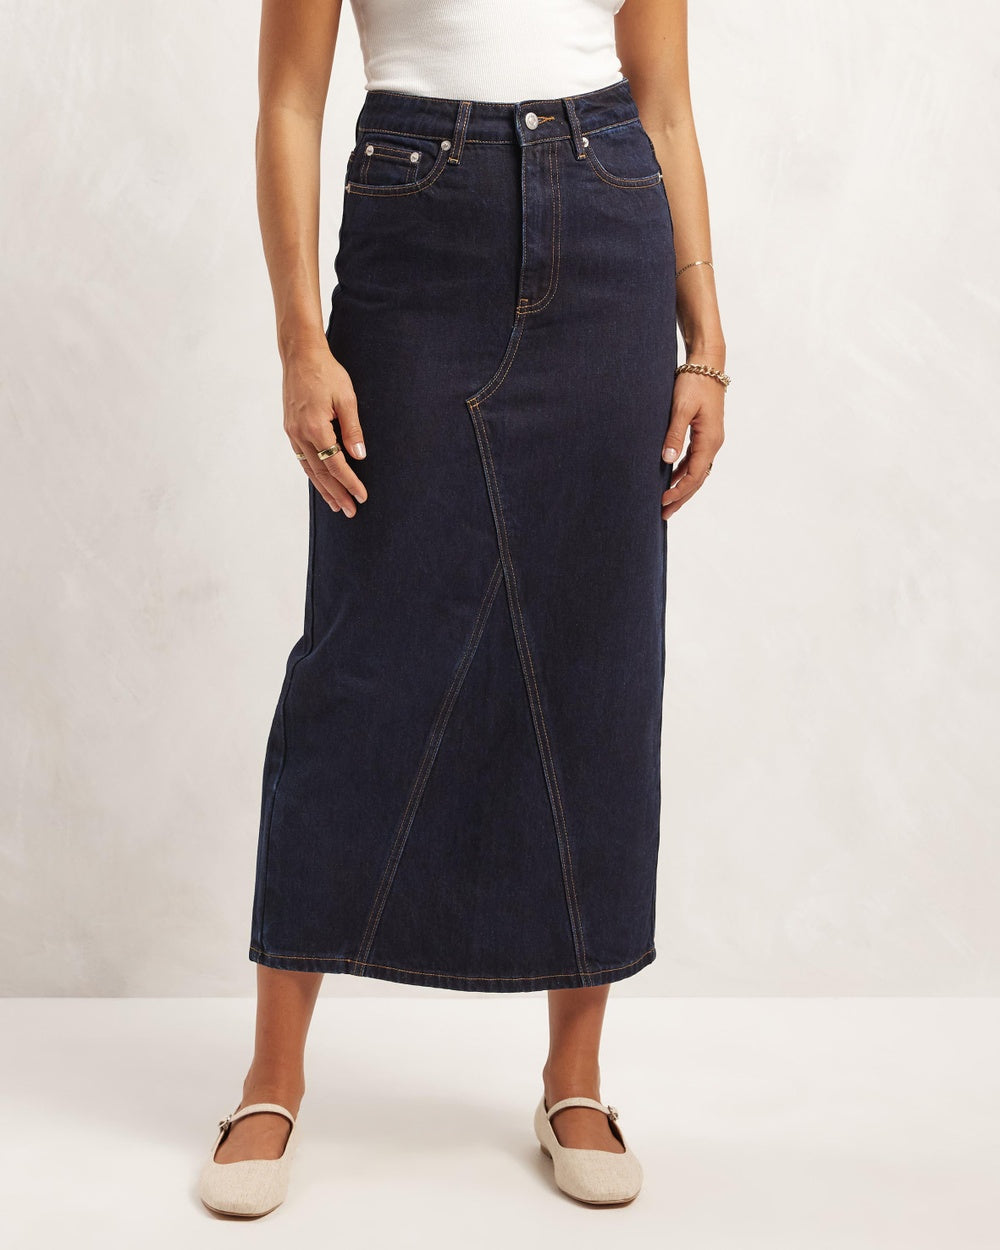 Denim Midi Skirt to Wear Out or Casually